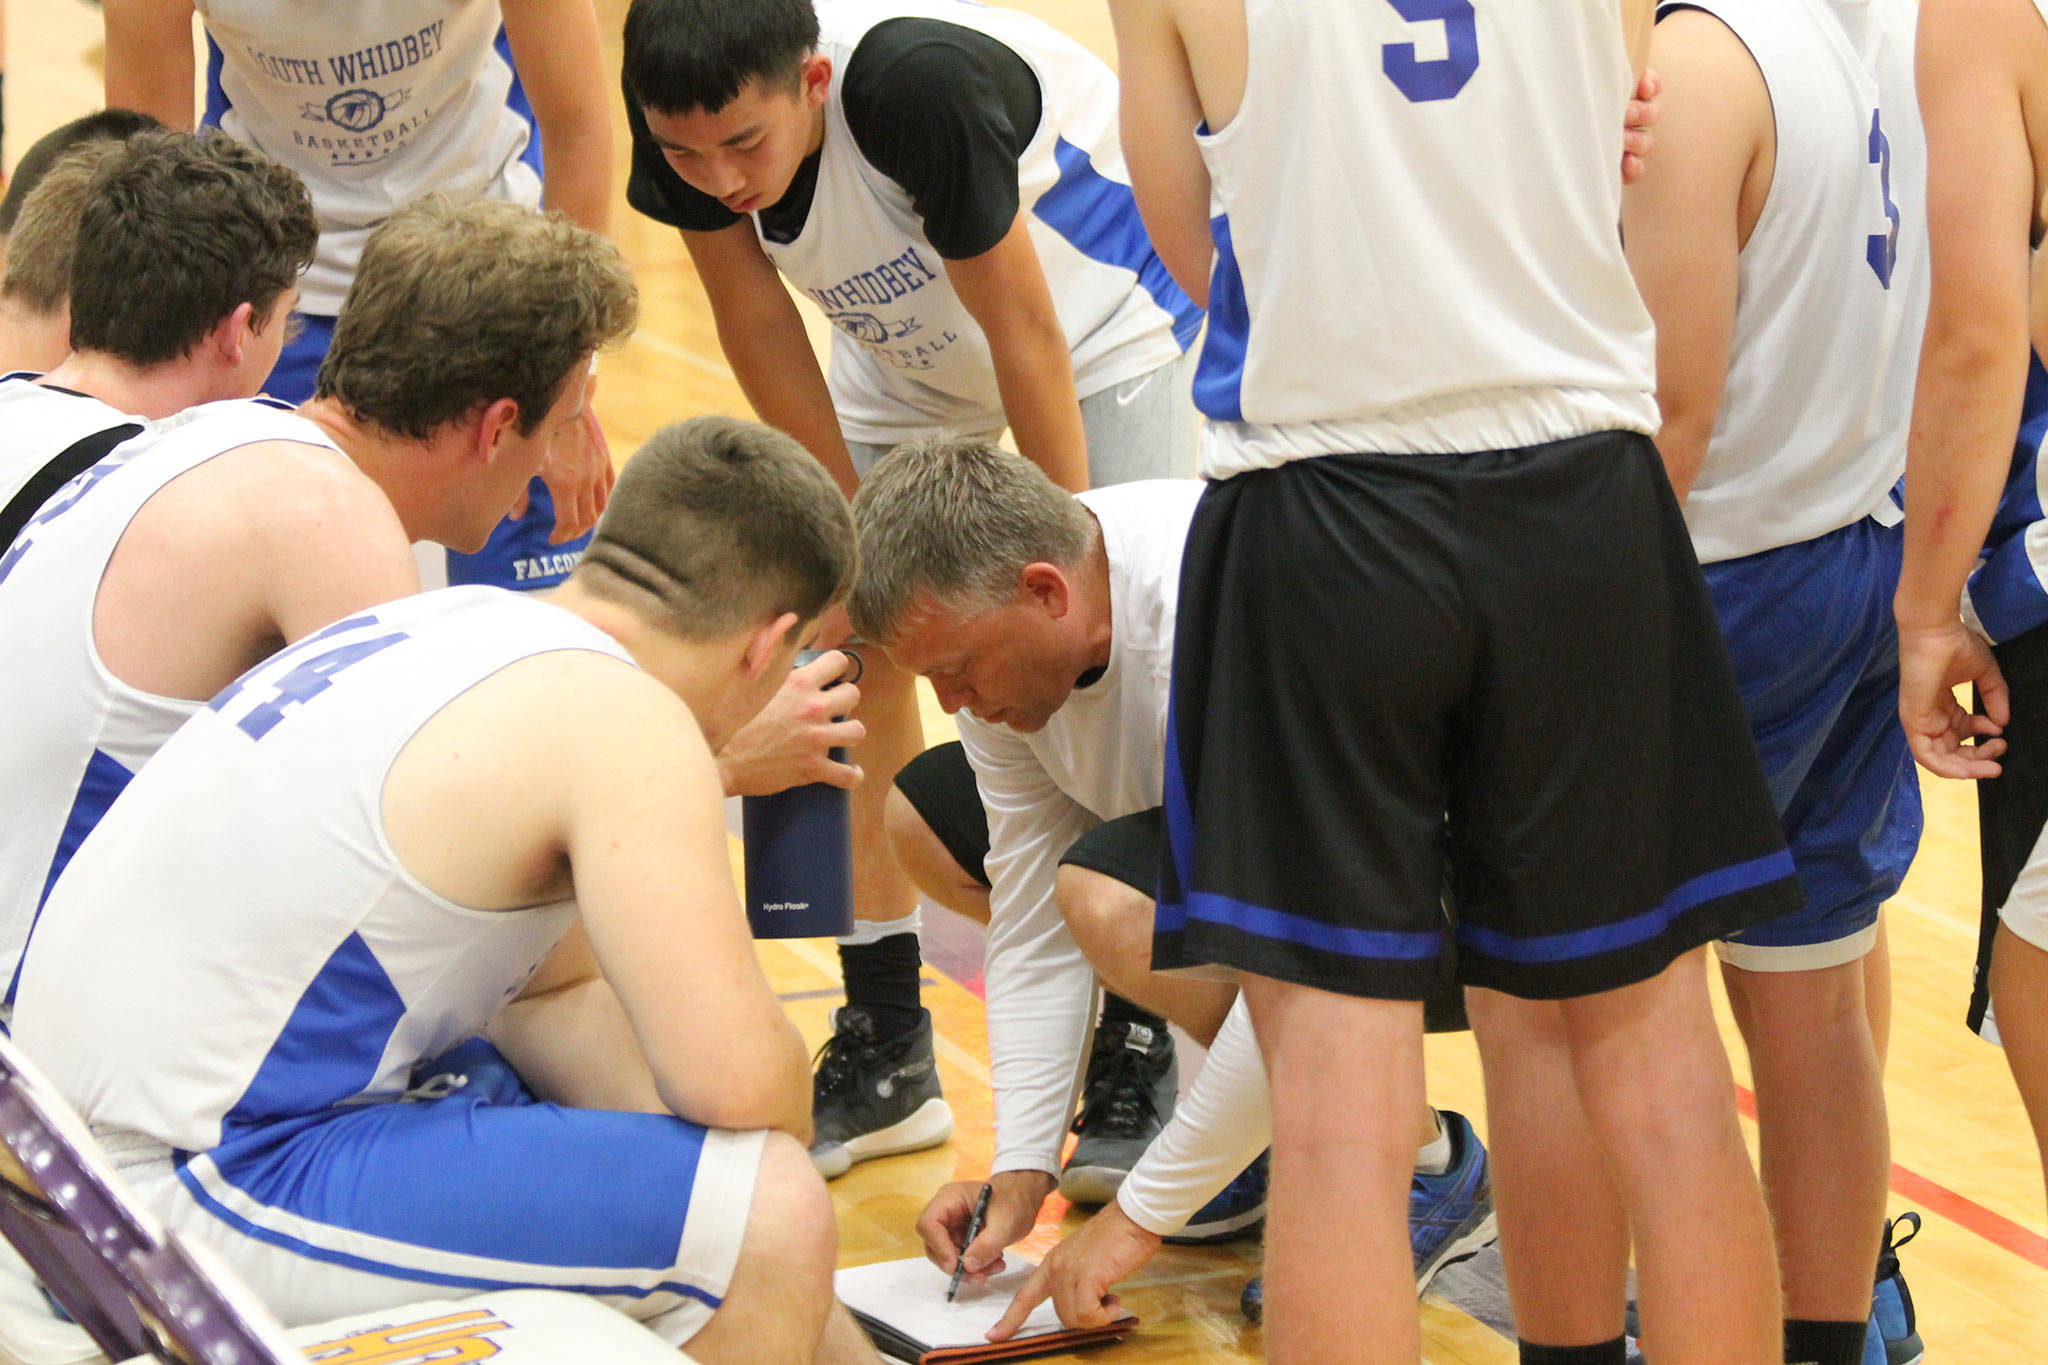 New boys basketball coach Greg Turcott draws up a play during a break at a scrimmage in Oak Harbor Wednesday. (Photo by Jim Waller/South Whidbey Record)